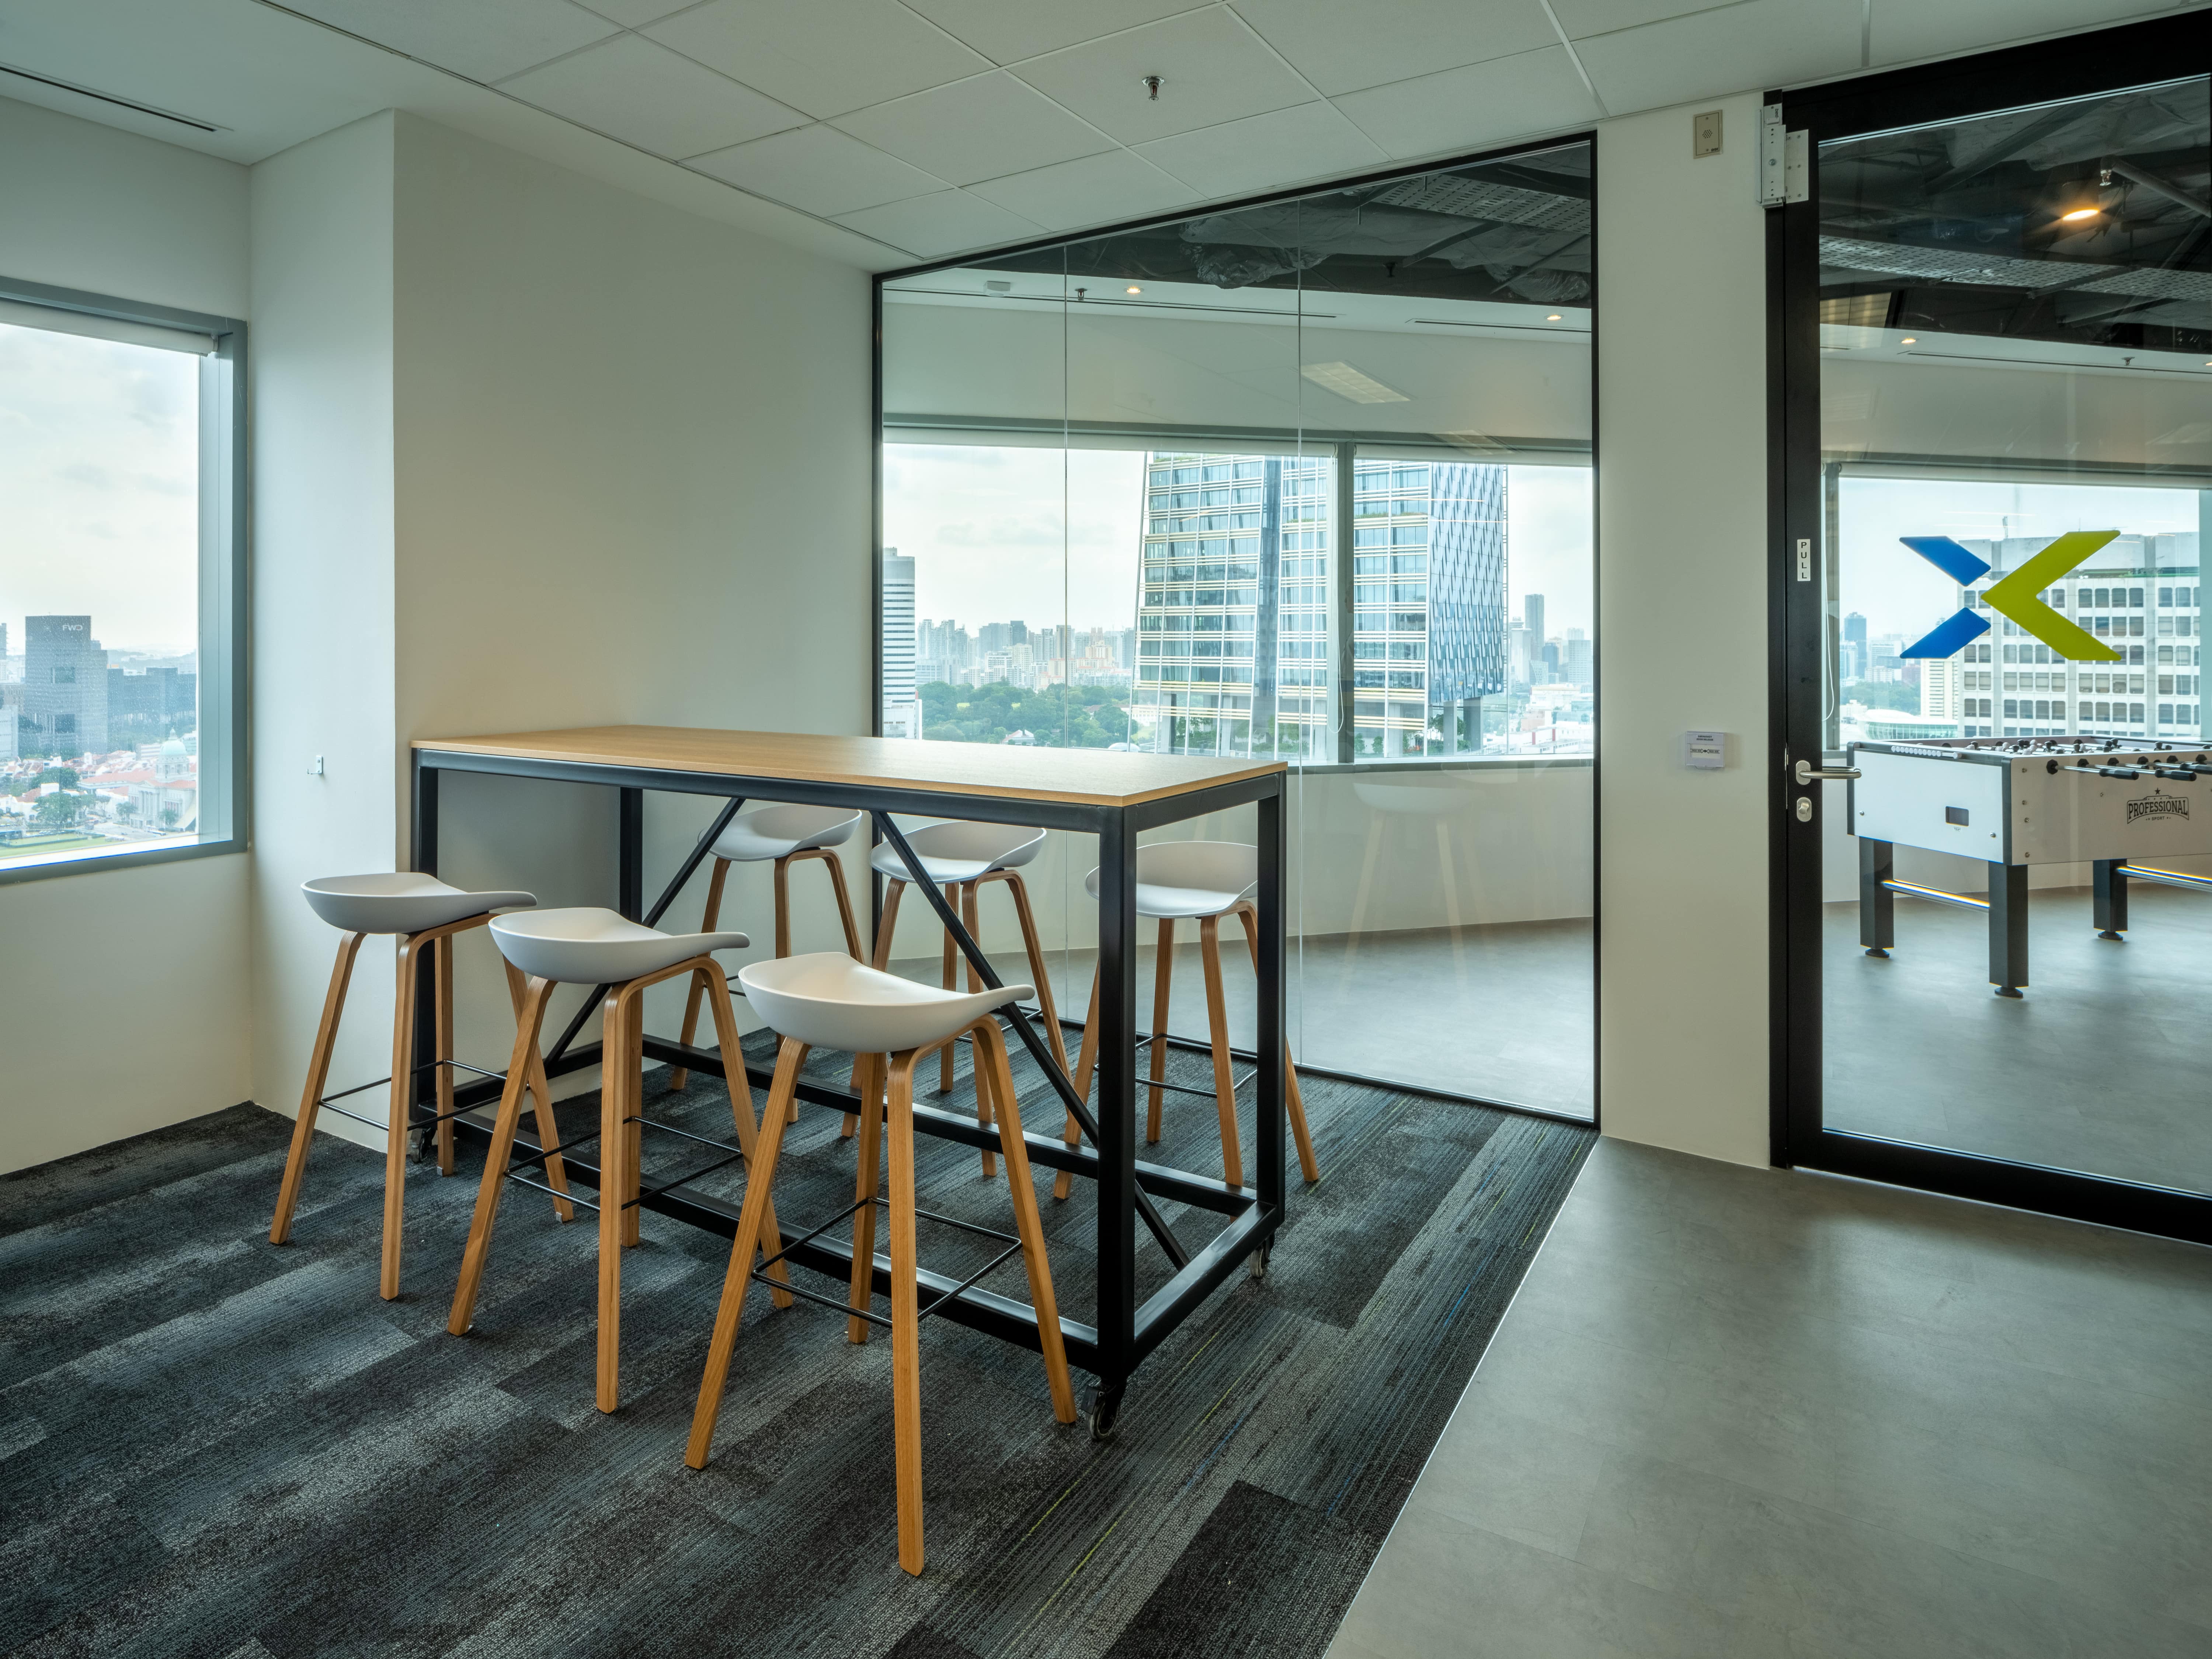 At the Nutanix Singapore office, Space Matrix factored in various design elements that lead to sustainable and energy-efficient light and water use